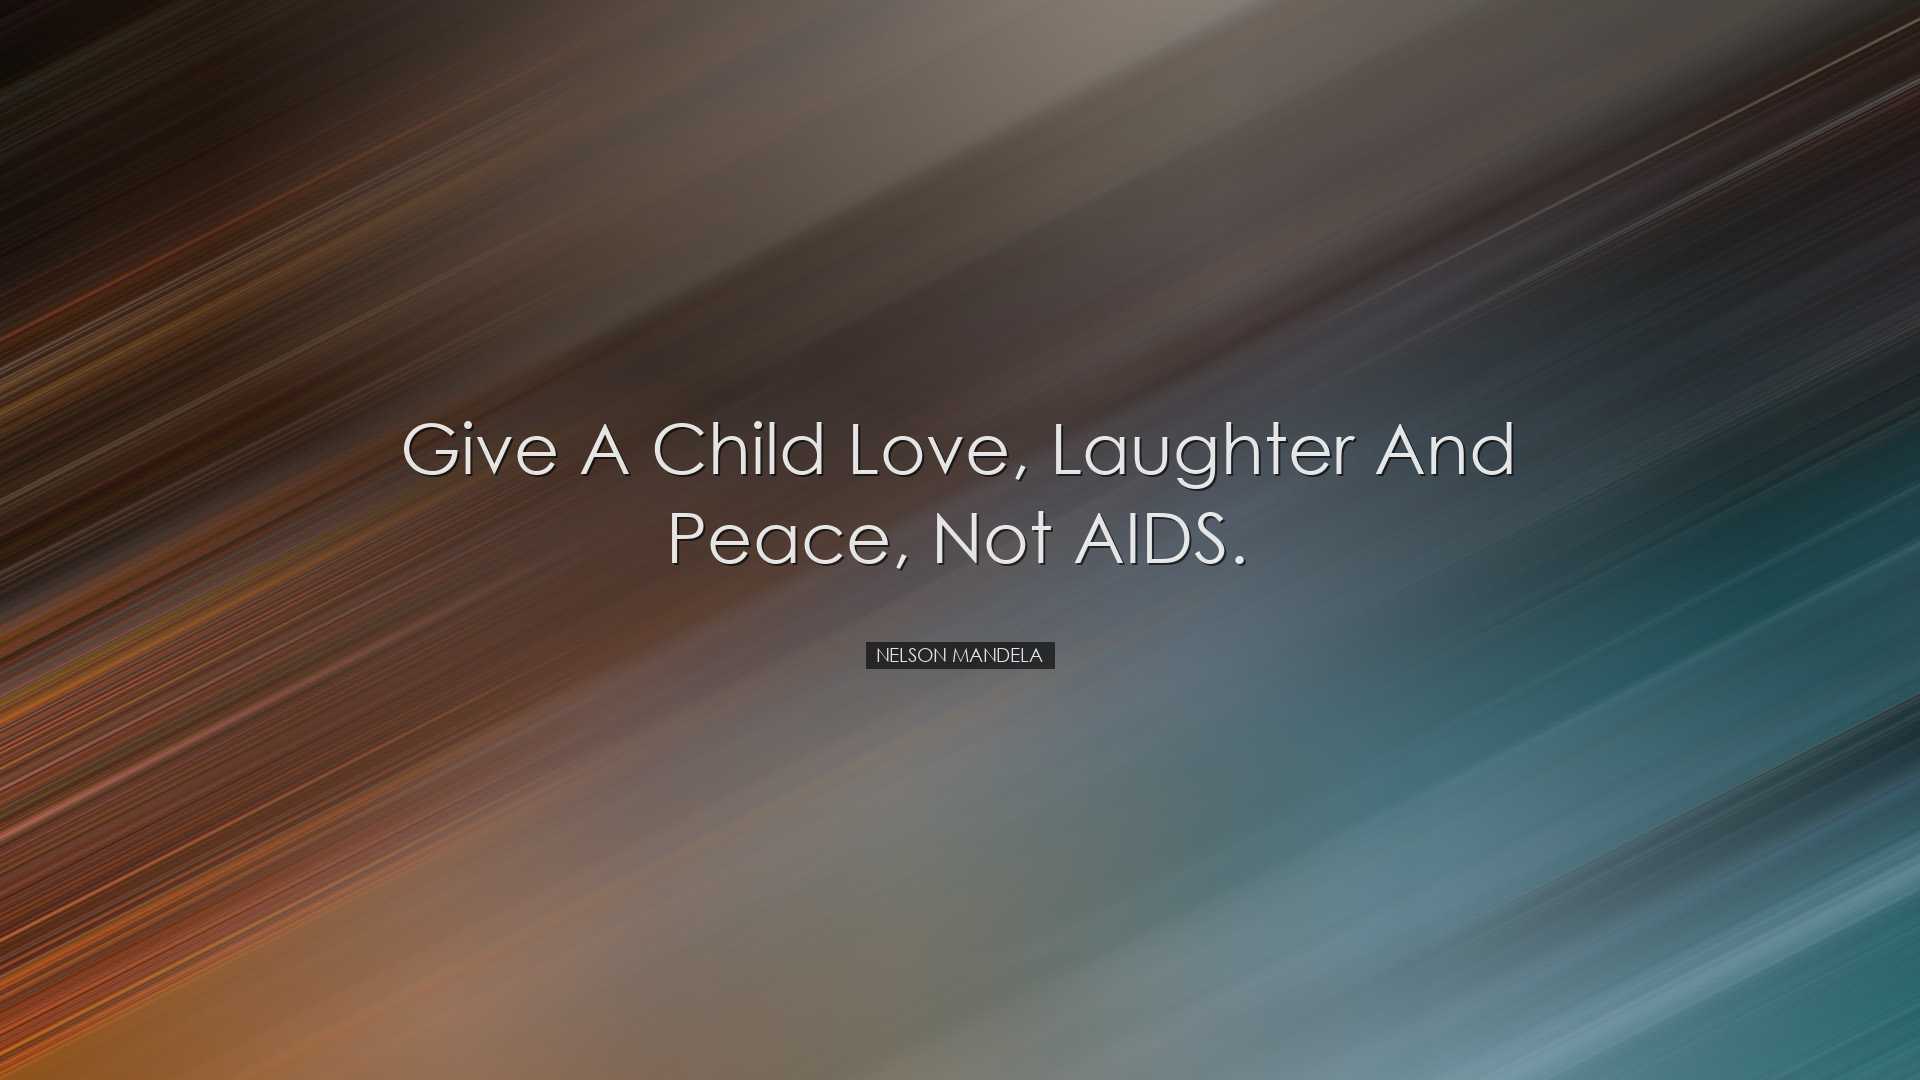 Give a child love, laughter and peace, not AIDS. - Nelson Mandela